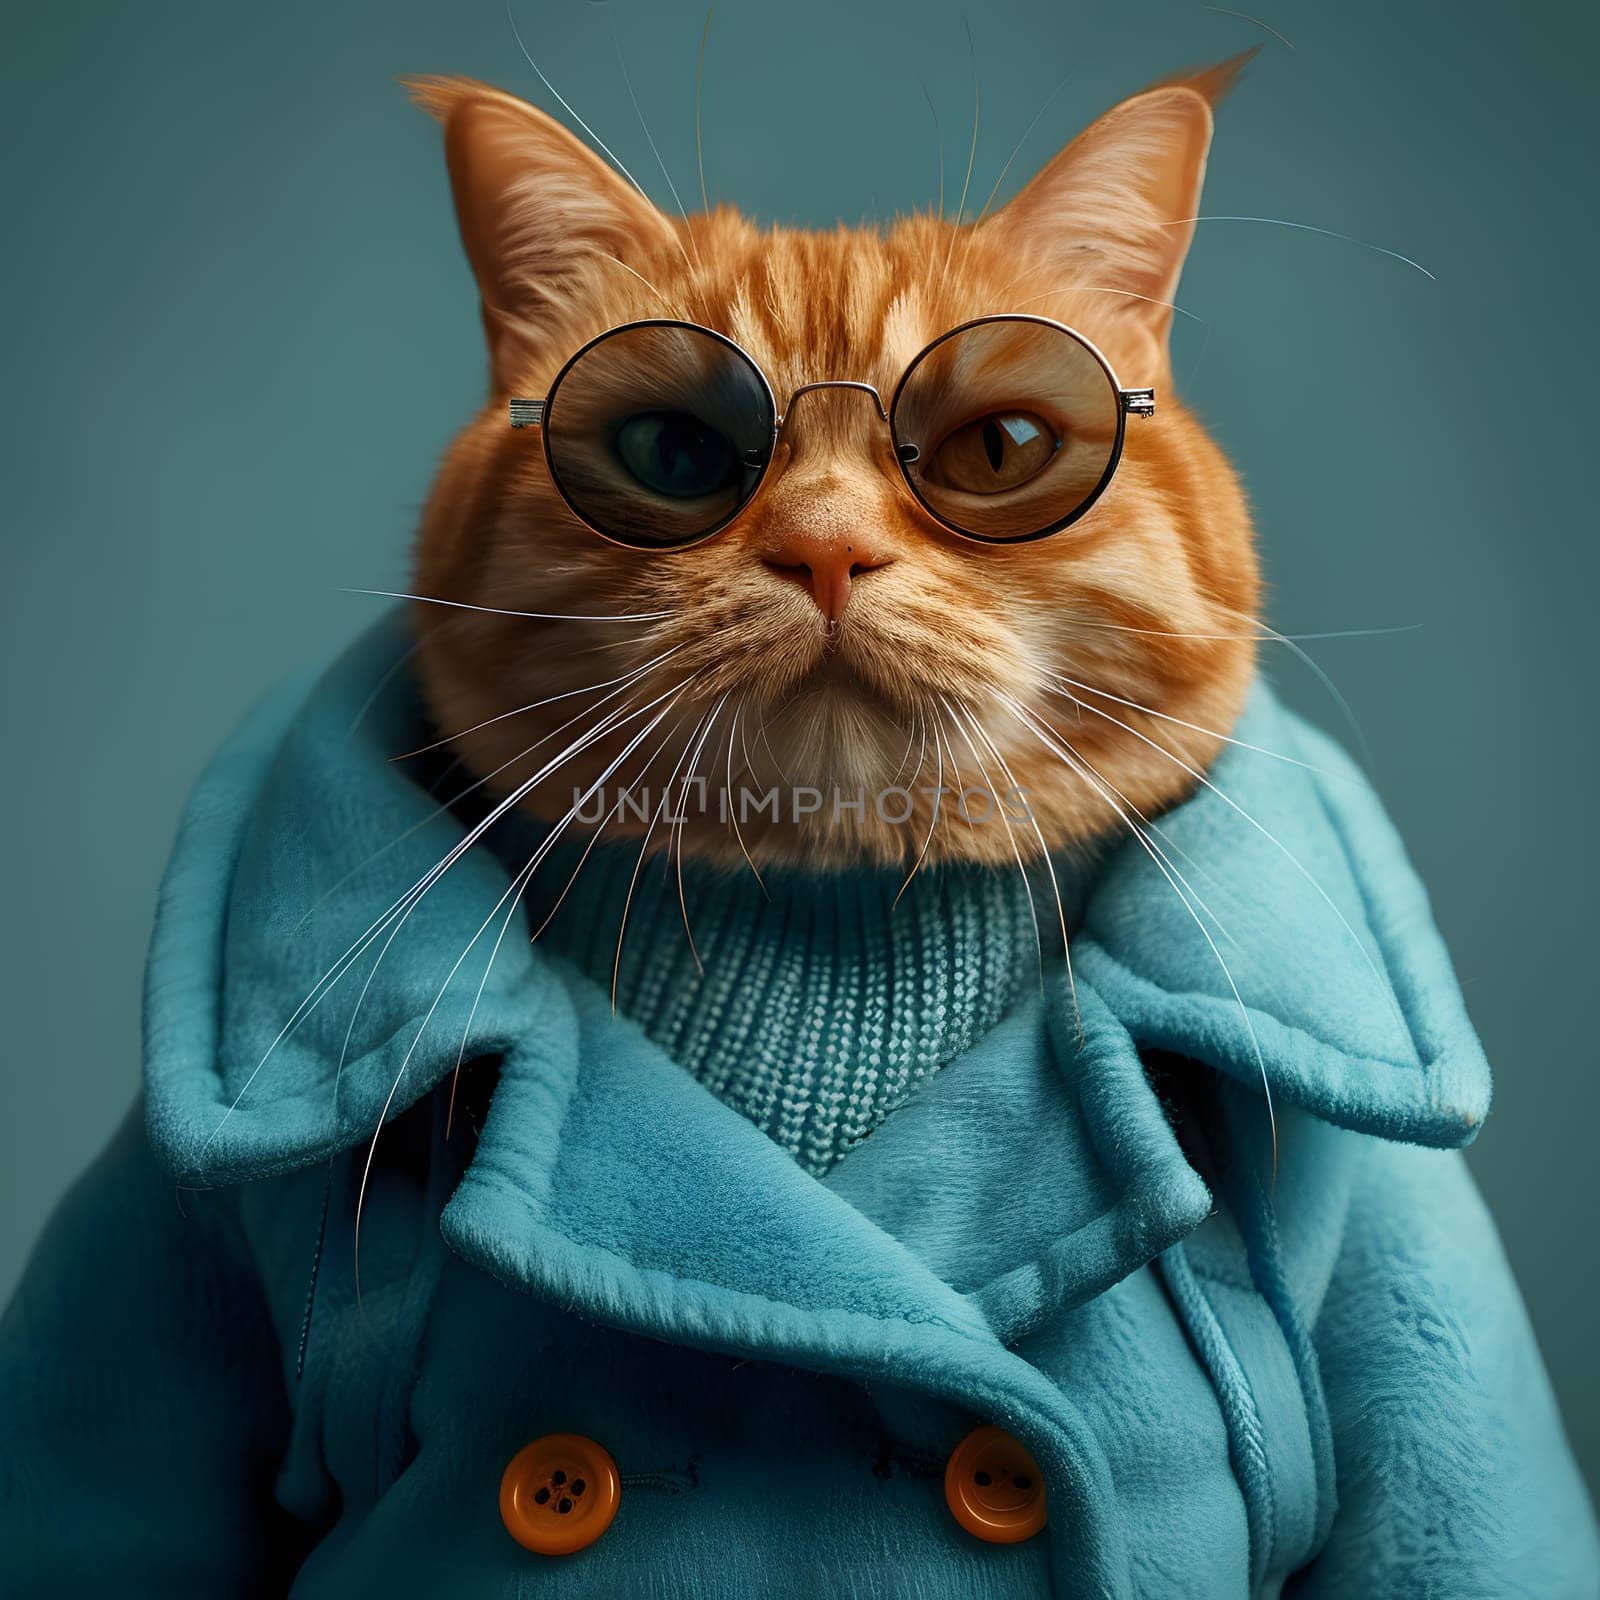 Feline in sunglasses, wearing a blue coat and looking cool with head tilted by Nadtochiy